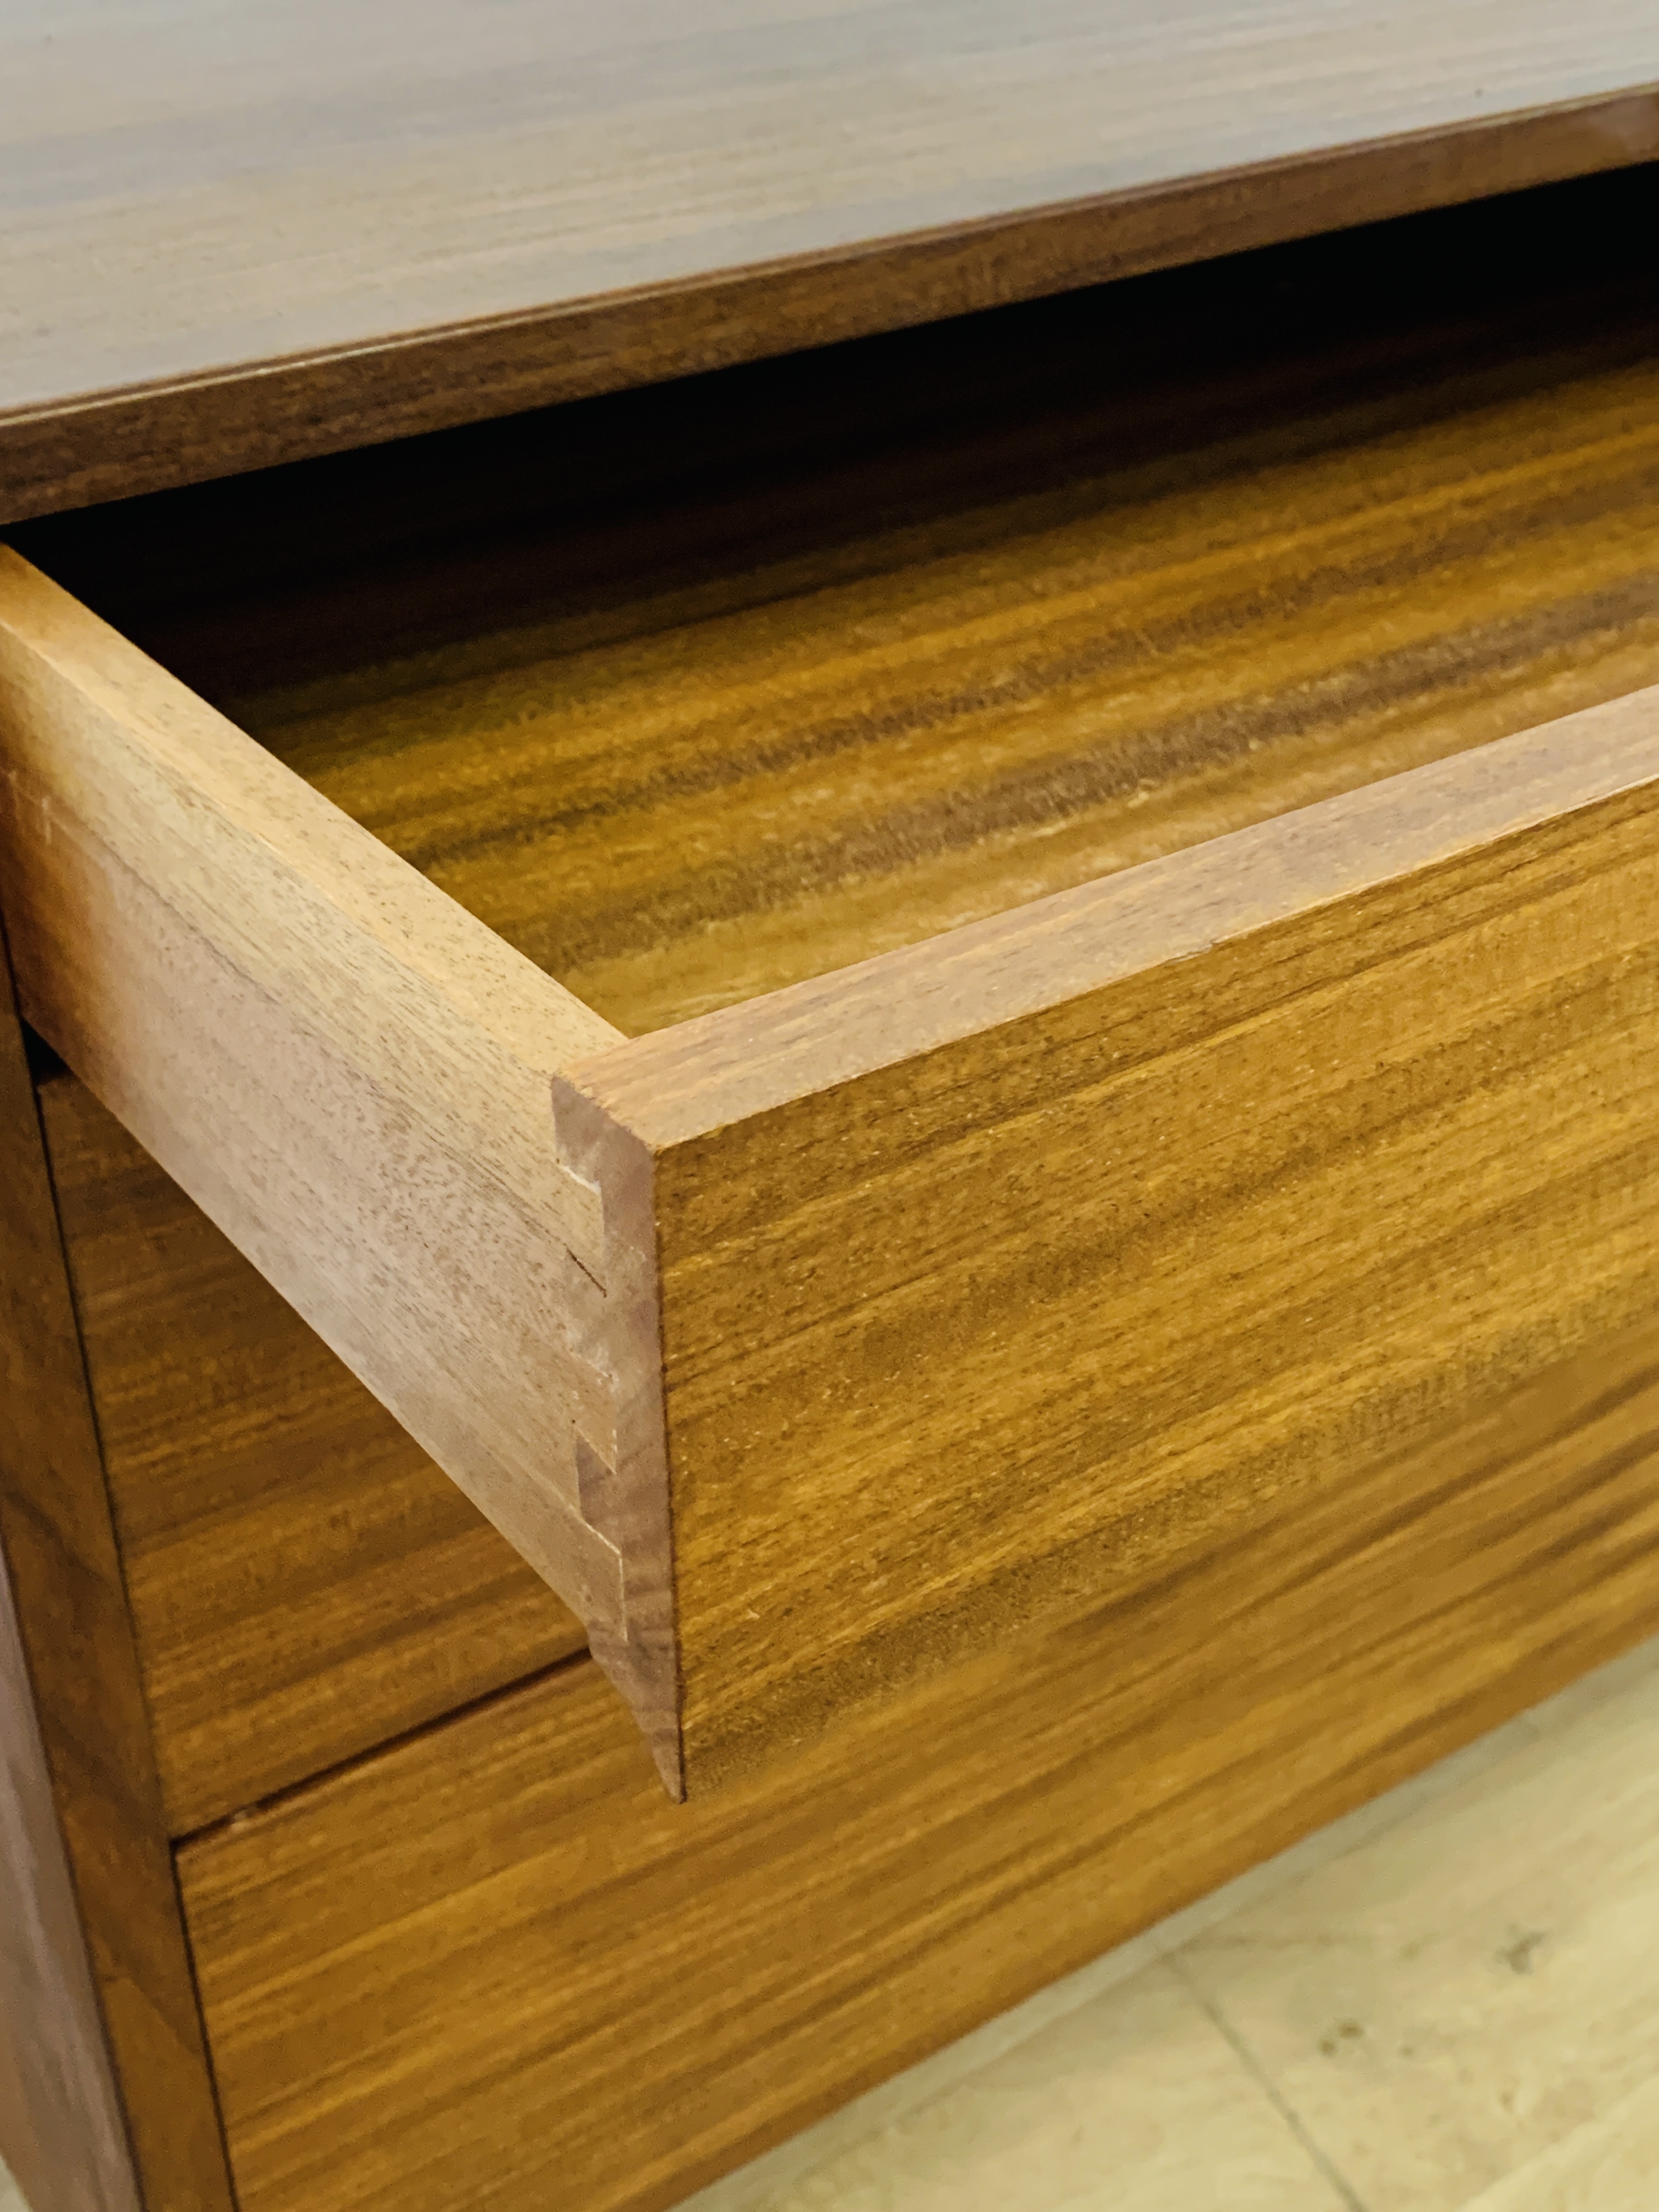 Teak chest of drawers - Image 5 of 7